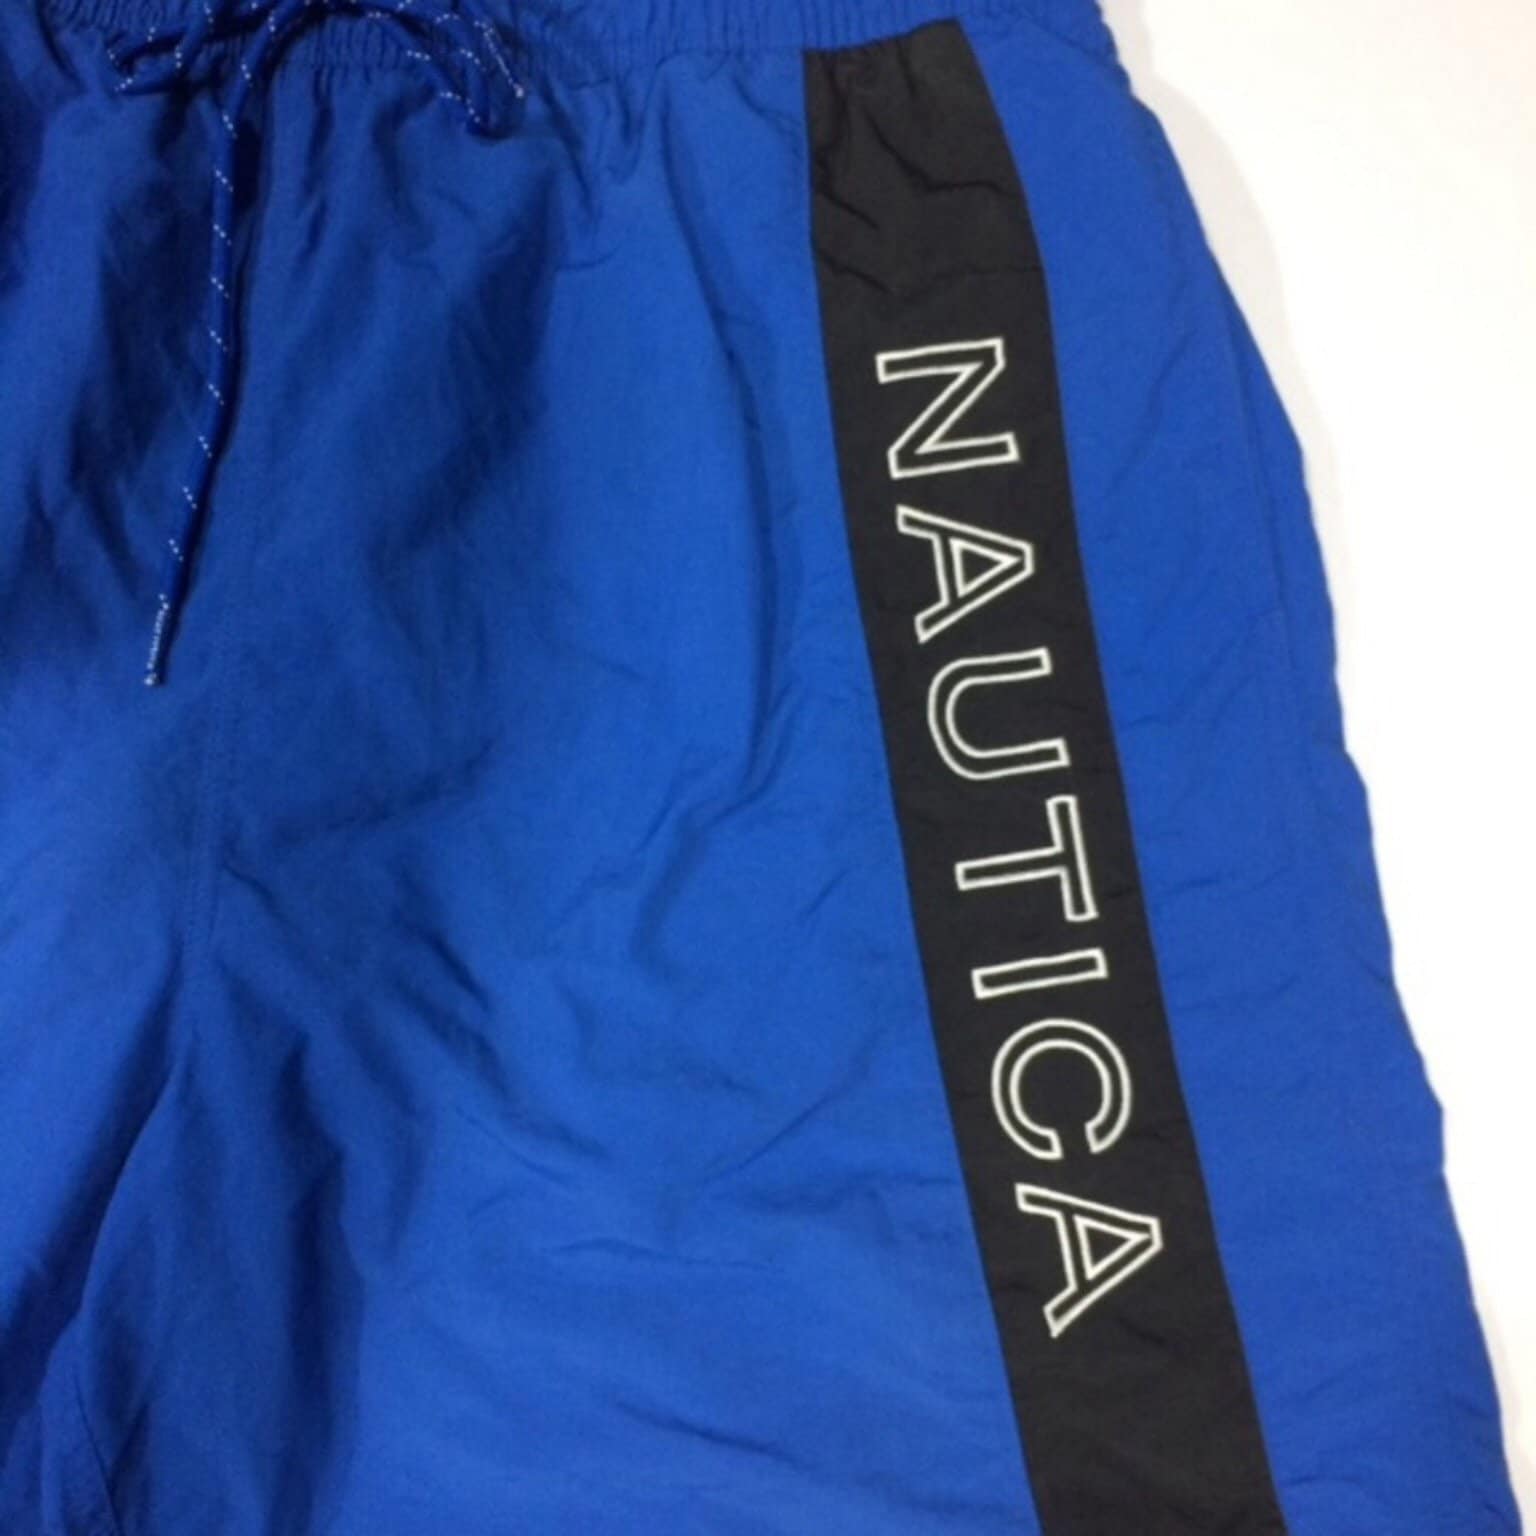 Vintage Nautica 90s Blue Spell Out Swim Shorts Trunks - Etsy